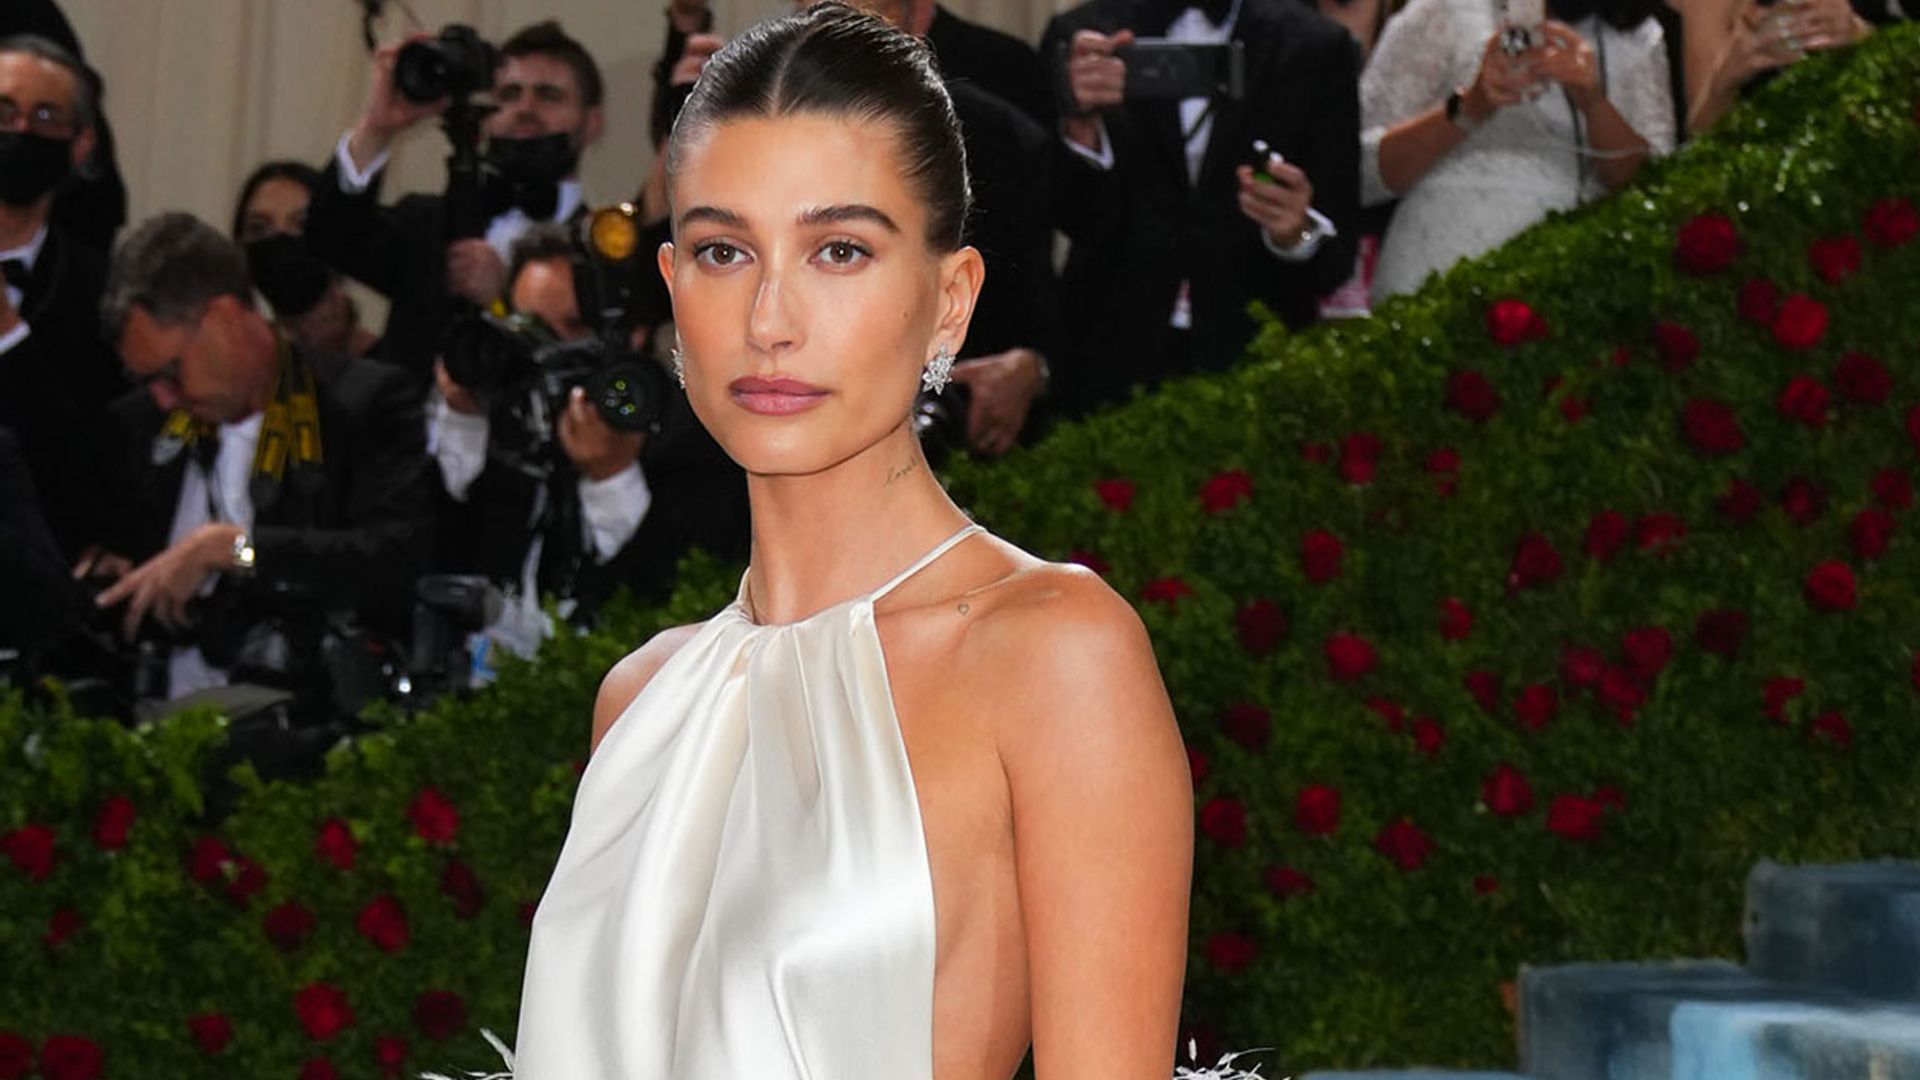 Hailey Bieber stuns in leather shorts at Met Gala afterparty amid health update